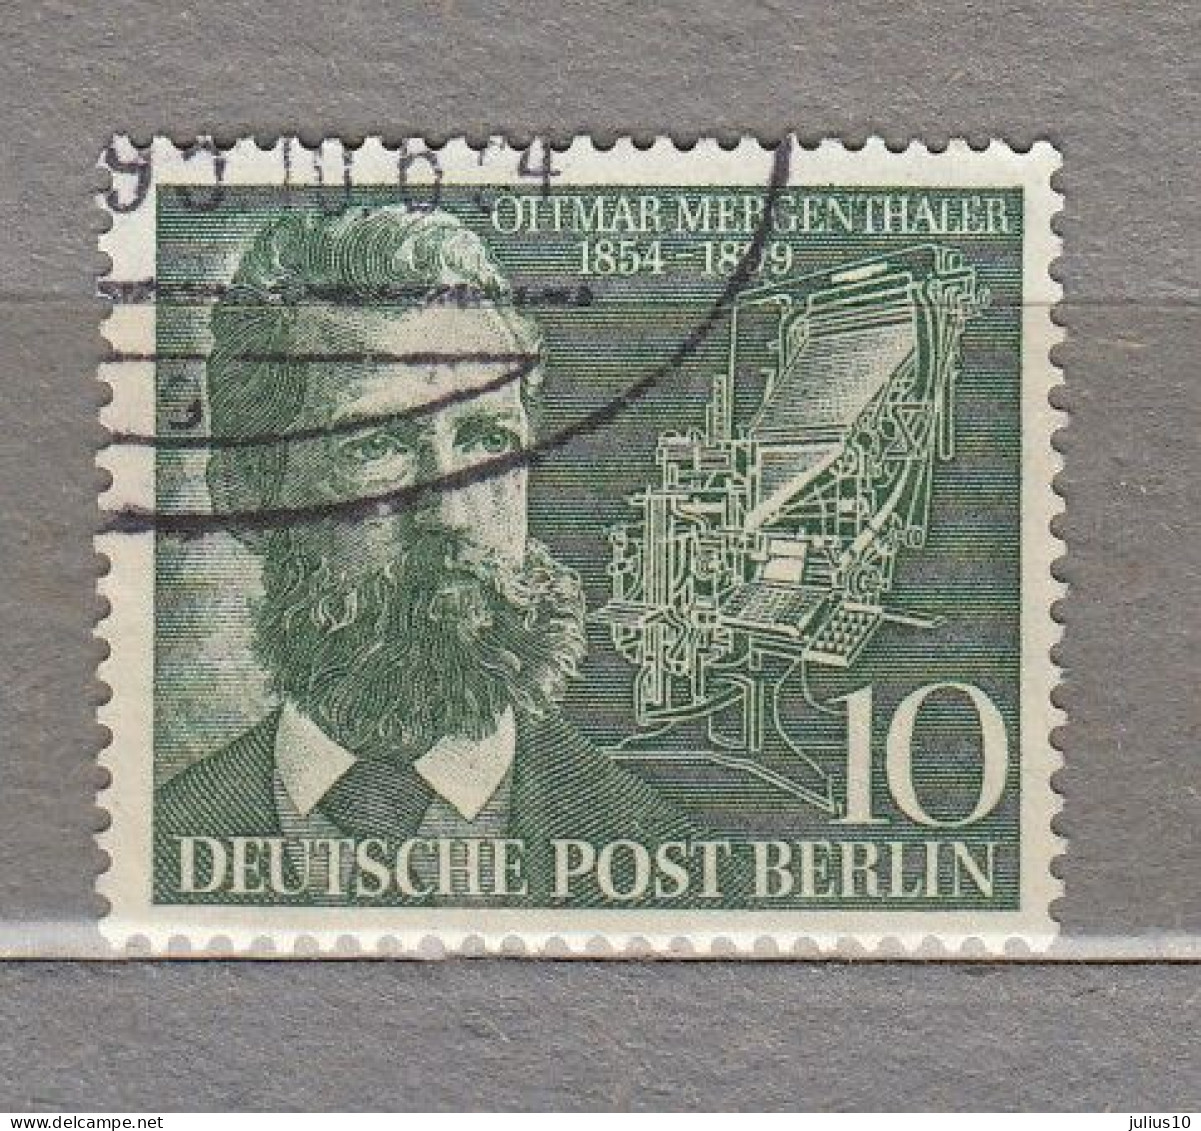 GERMANY BERLIN 1954 Used (o) Mi 117 #33975 - Used Stamps